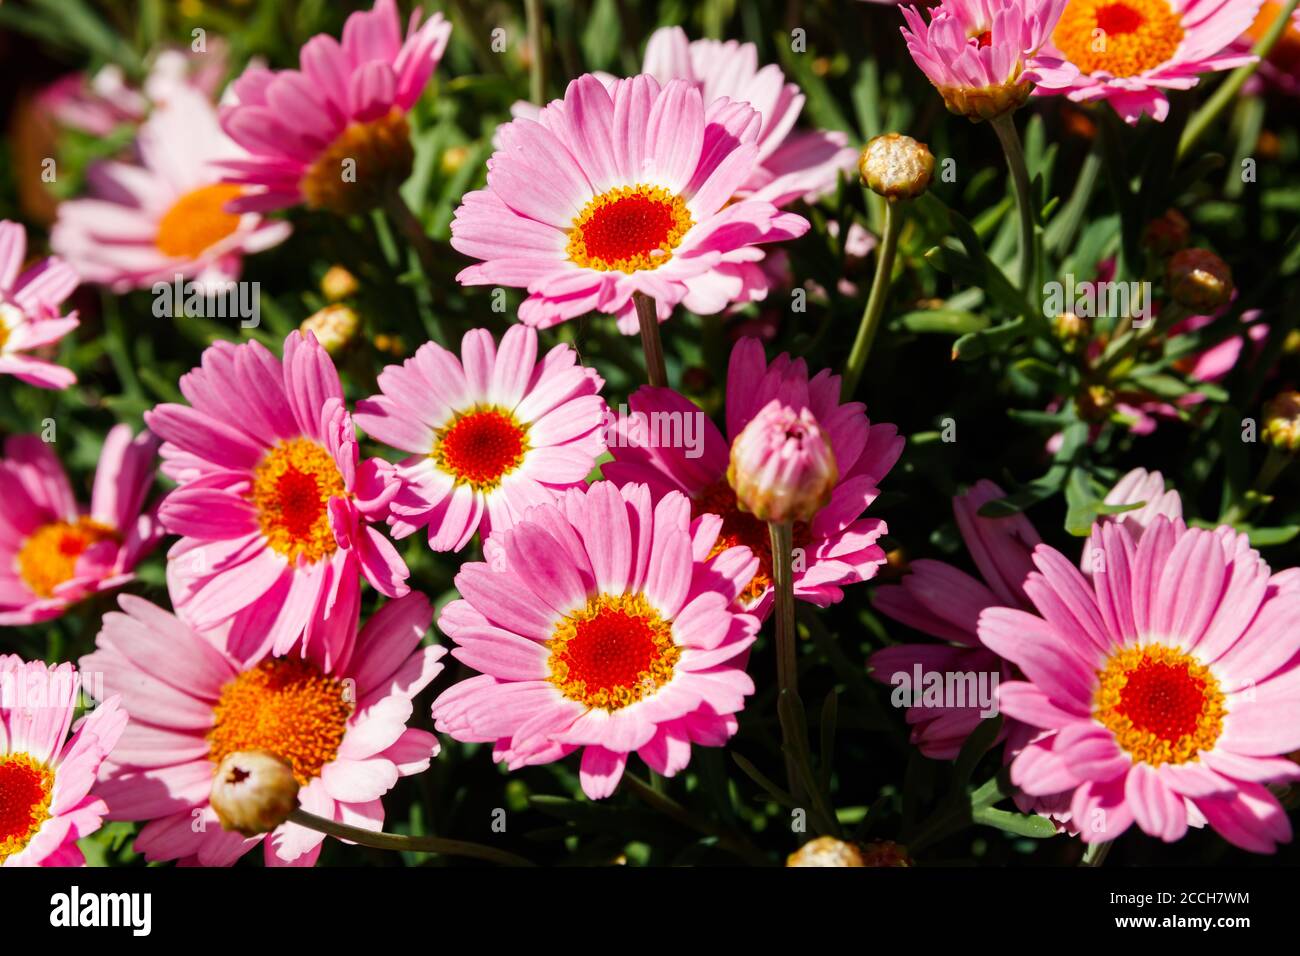 Blooming Pink Marguerite daisy or Paris daisy or Argyranthemum frutescens in the garden Stock Photo